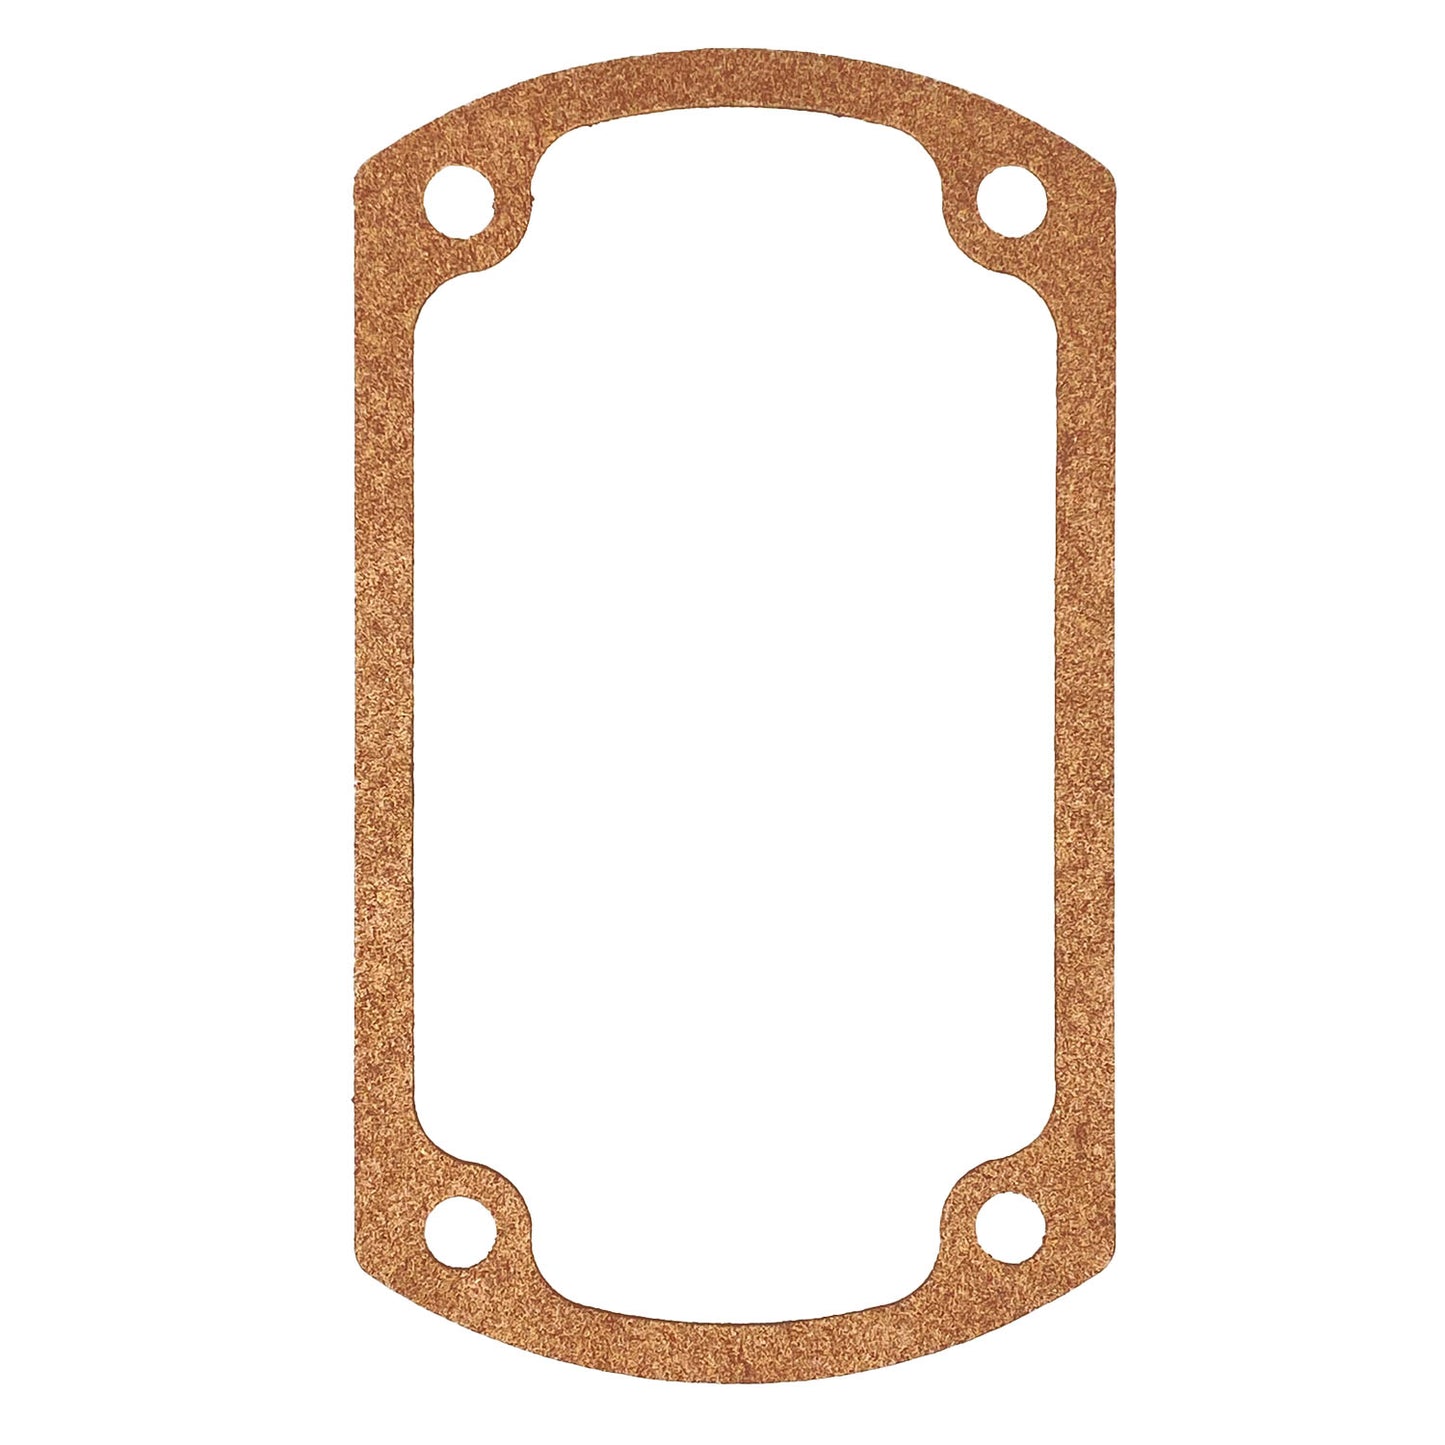 Ingersoll Rand SS3 Cylinder Base Gasket Replacement for 9733066 Gasket